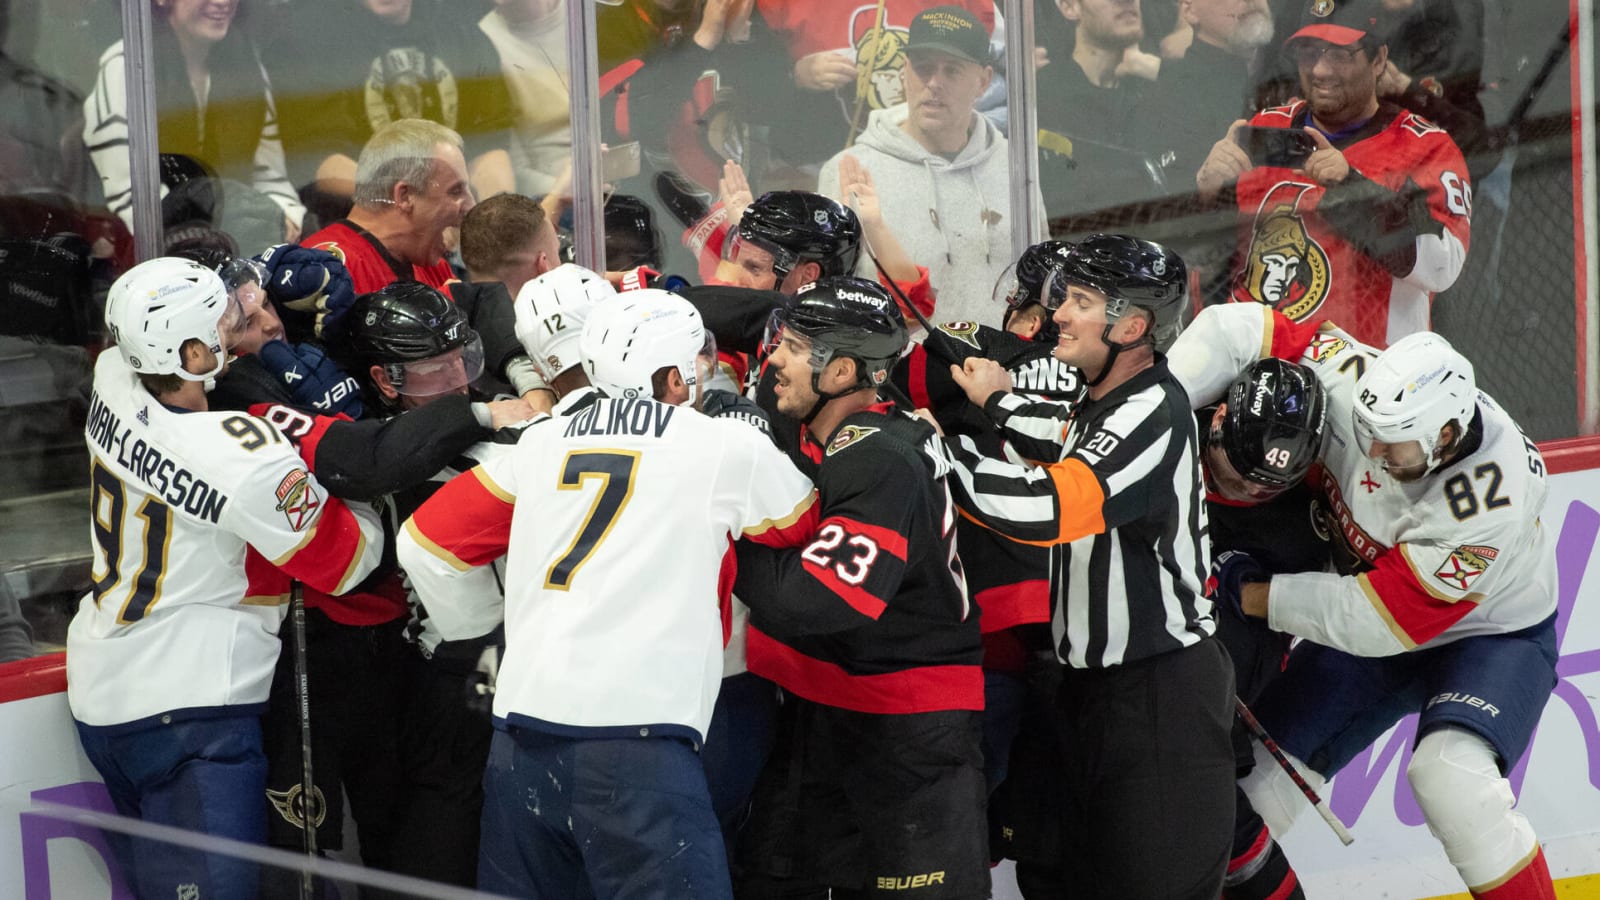 Panthers, Senators combine for 167 penalty minutes in chippy affair 